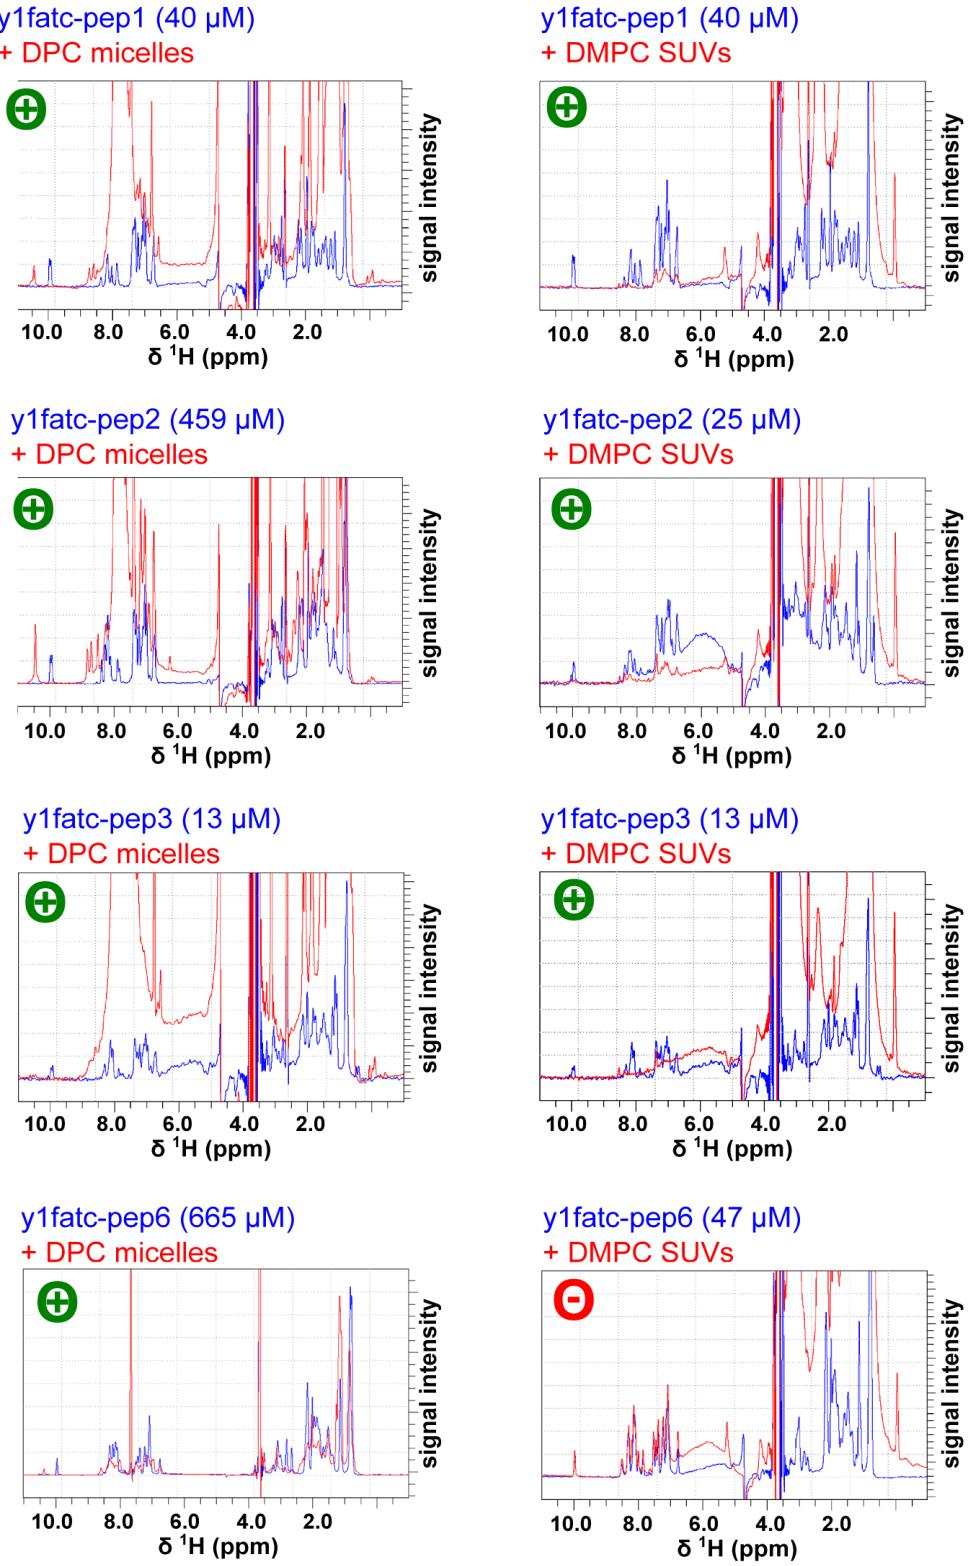 Figure 2: Monitoring of the interaction of the unlabeled y1fatc peptides with membrane mimetics by 1D 1 H NMR spectroscopy.